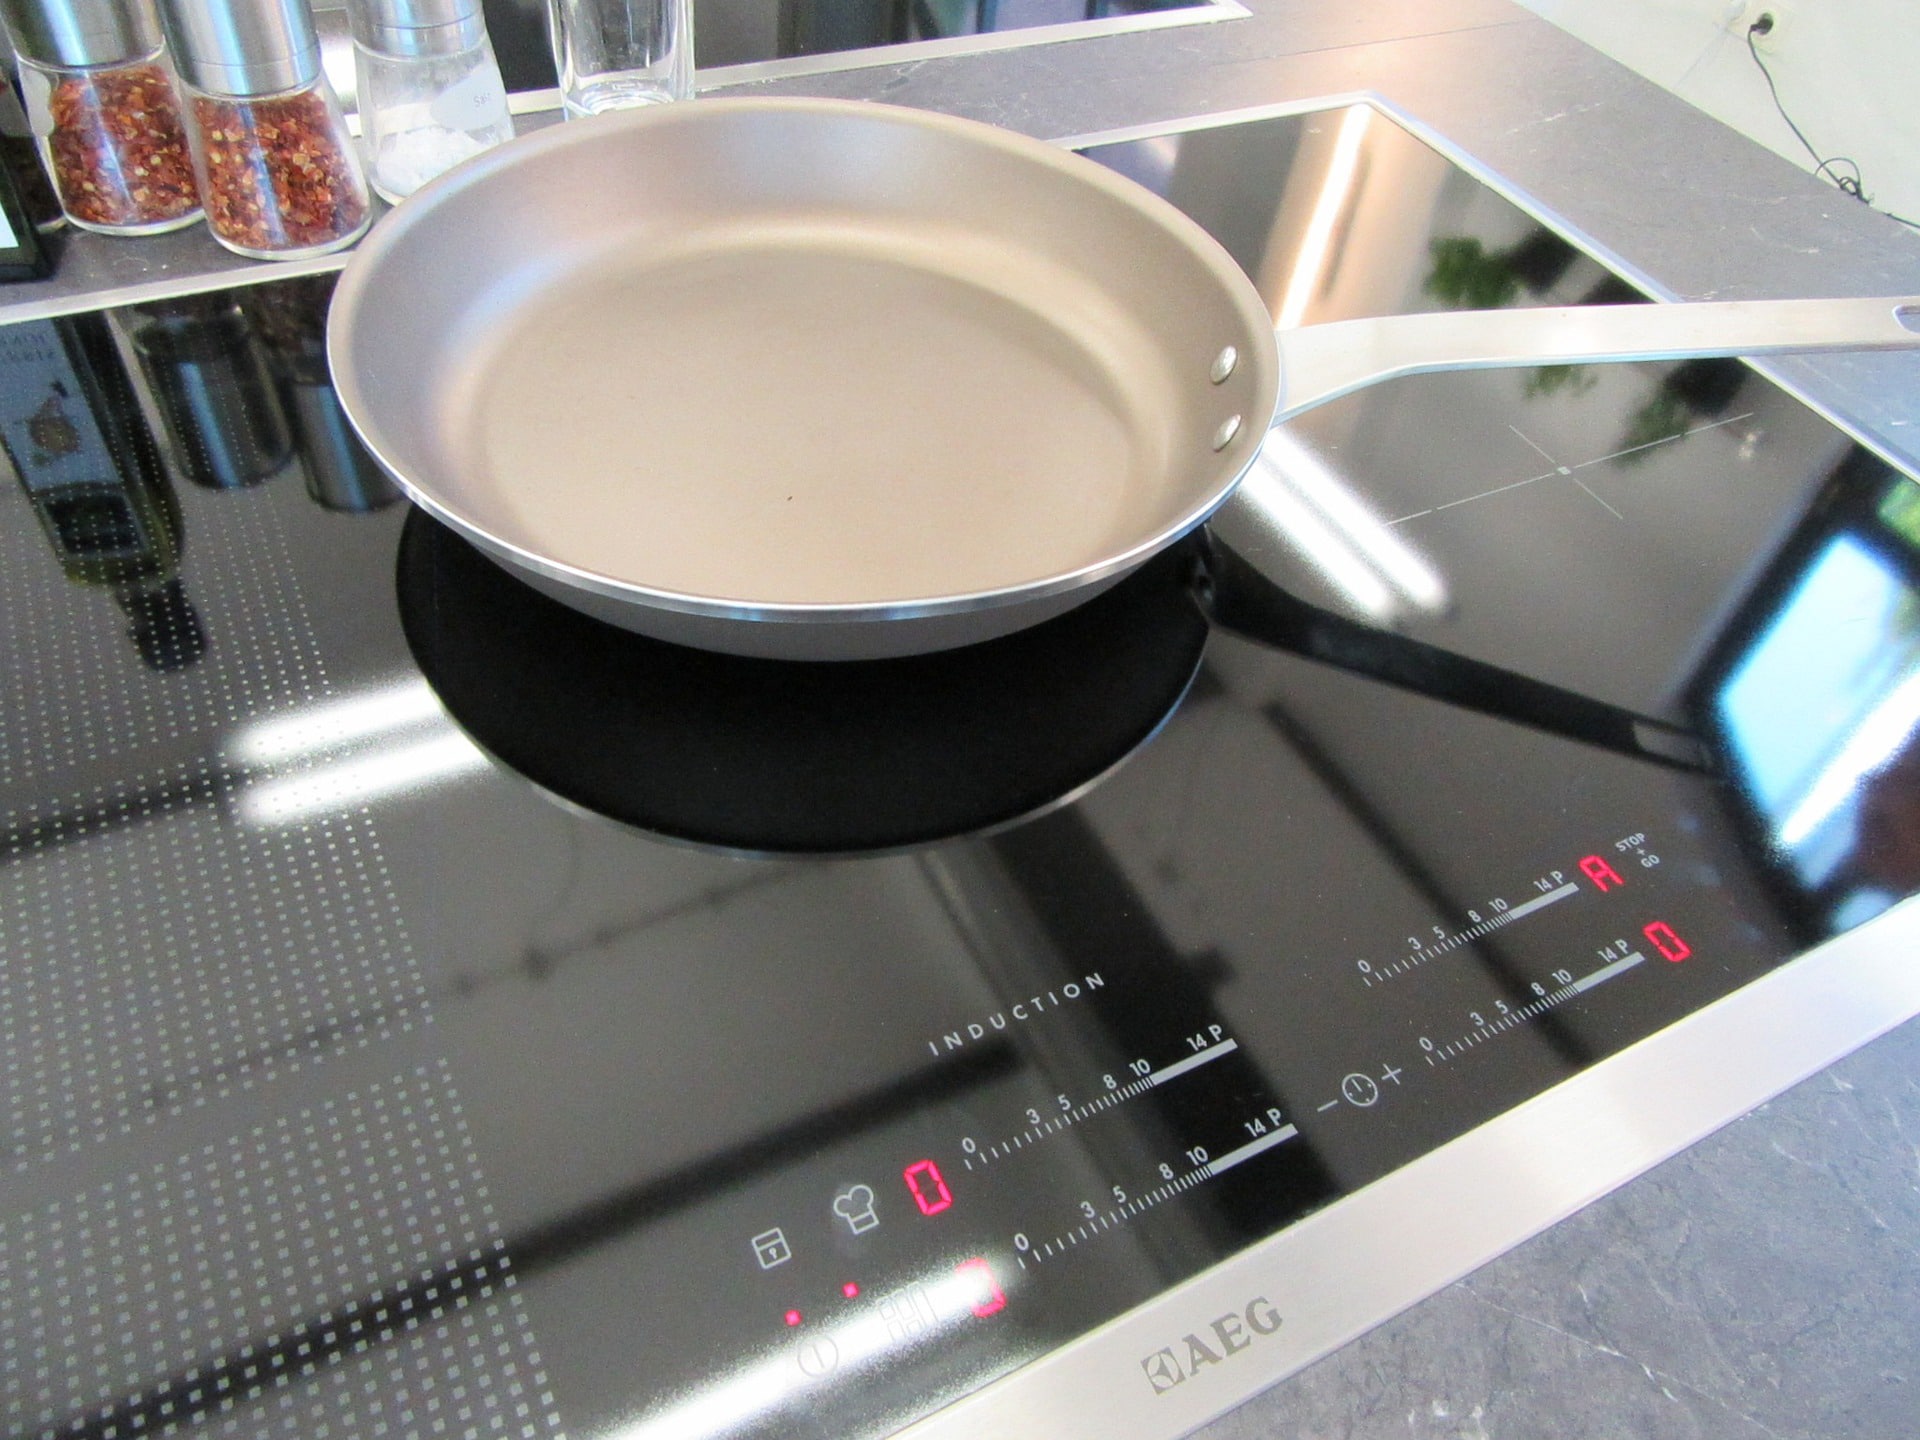 How to Clean an Induction Cooktop